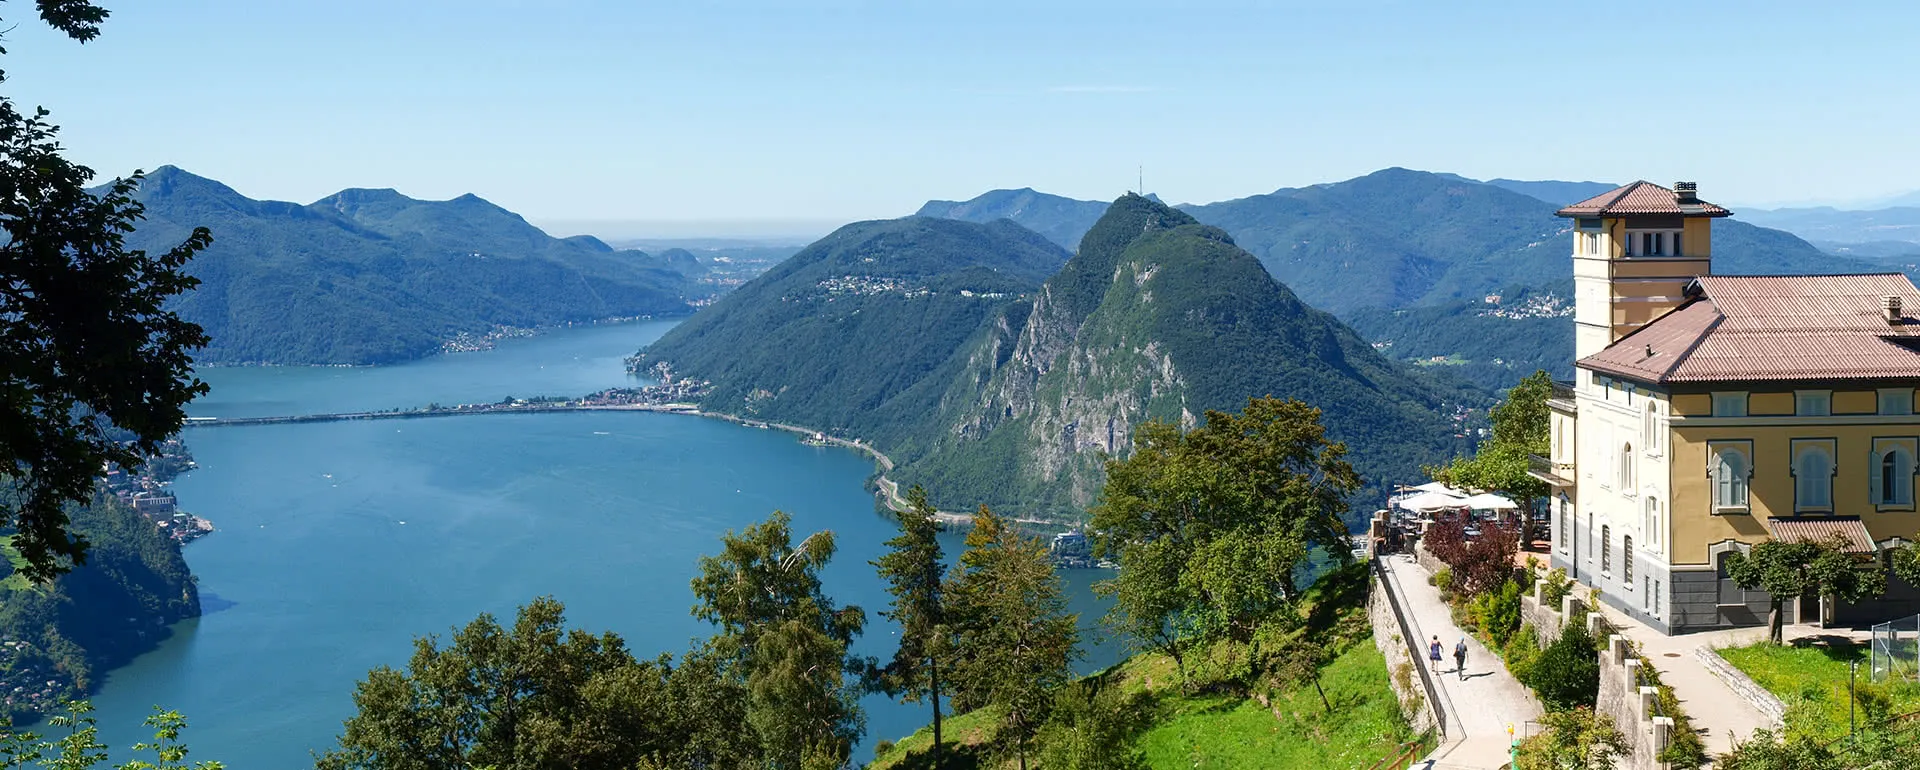 Lugano - the destination with youth hostels